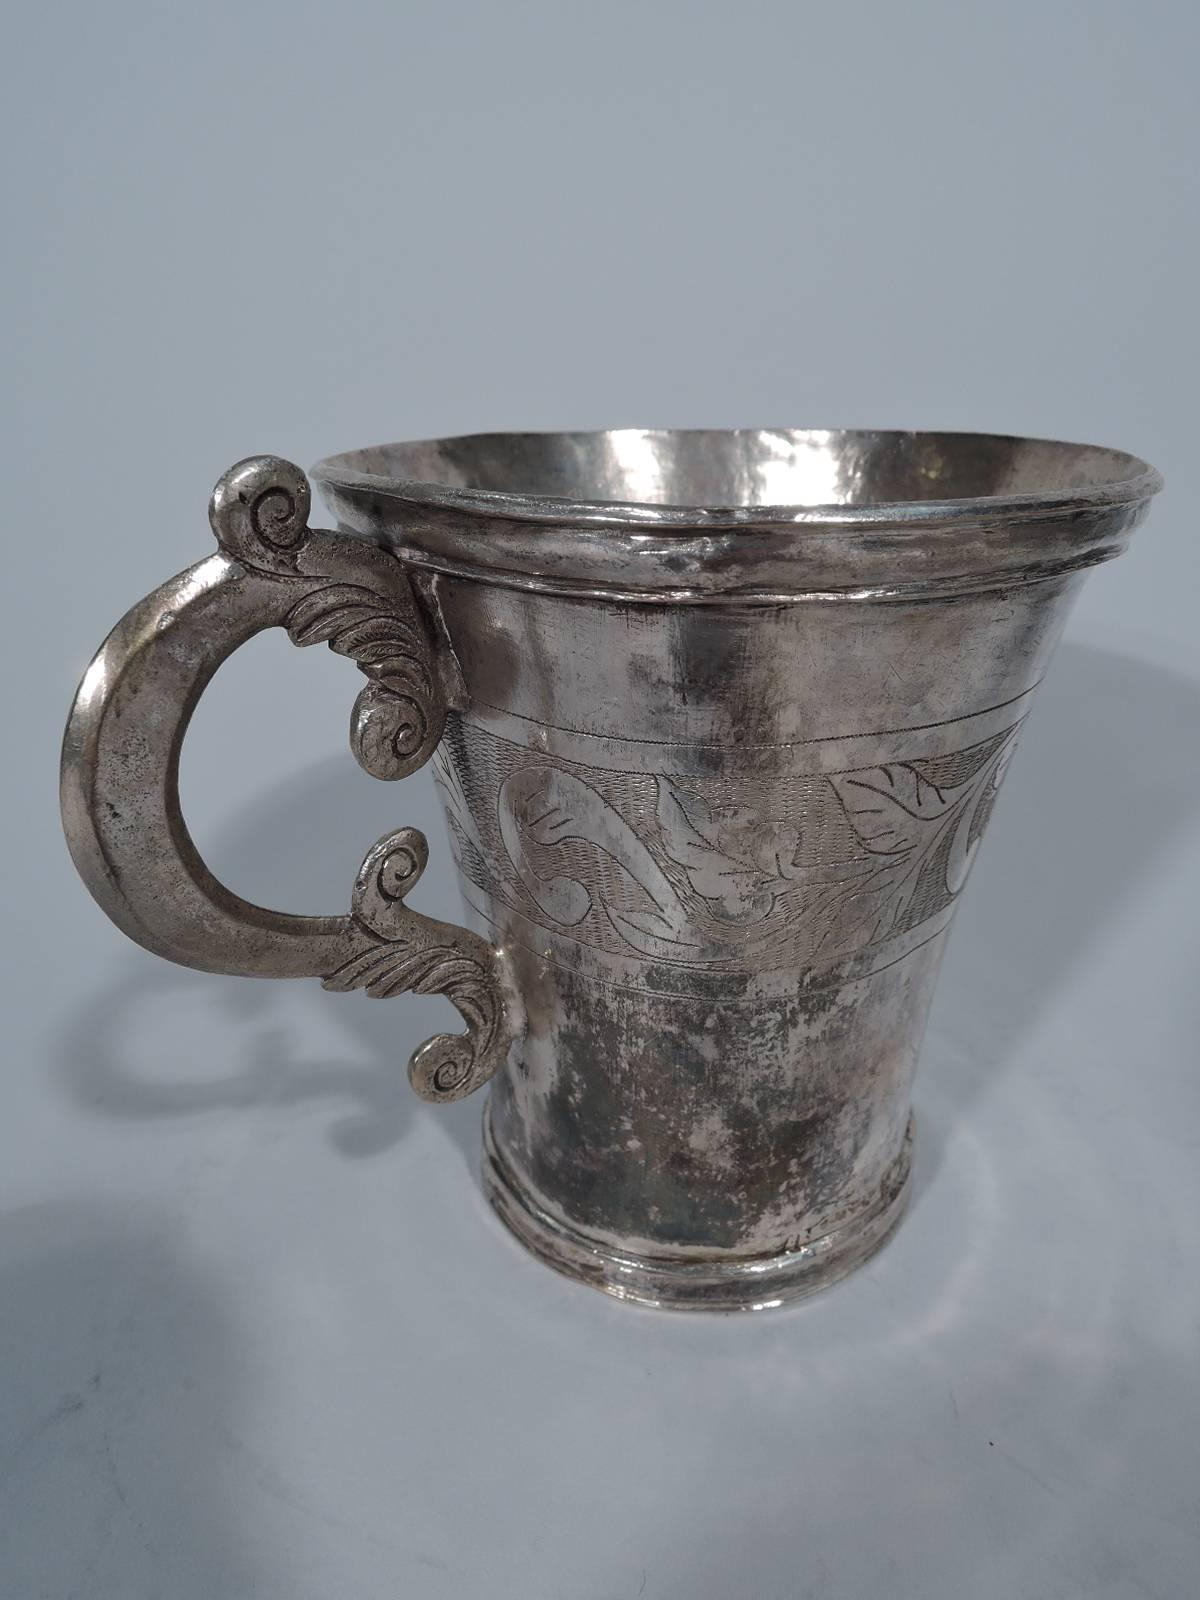 Good antique silver mug from South America, circa 1840. Tapering sides and flared rim. Engraved band of scrolls and flowers. S-scroll handle with worked leaves. Flared shape with worked handle. Condition: Nice old patina and character-enhancing